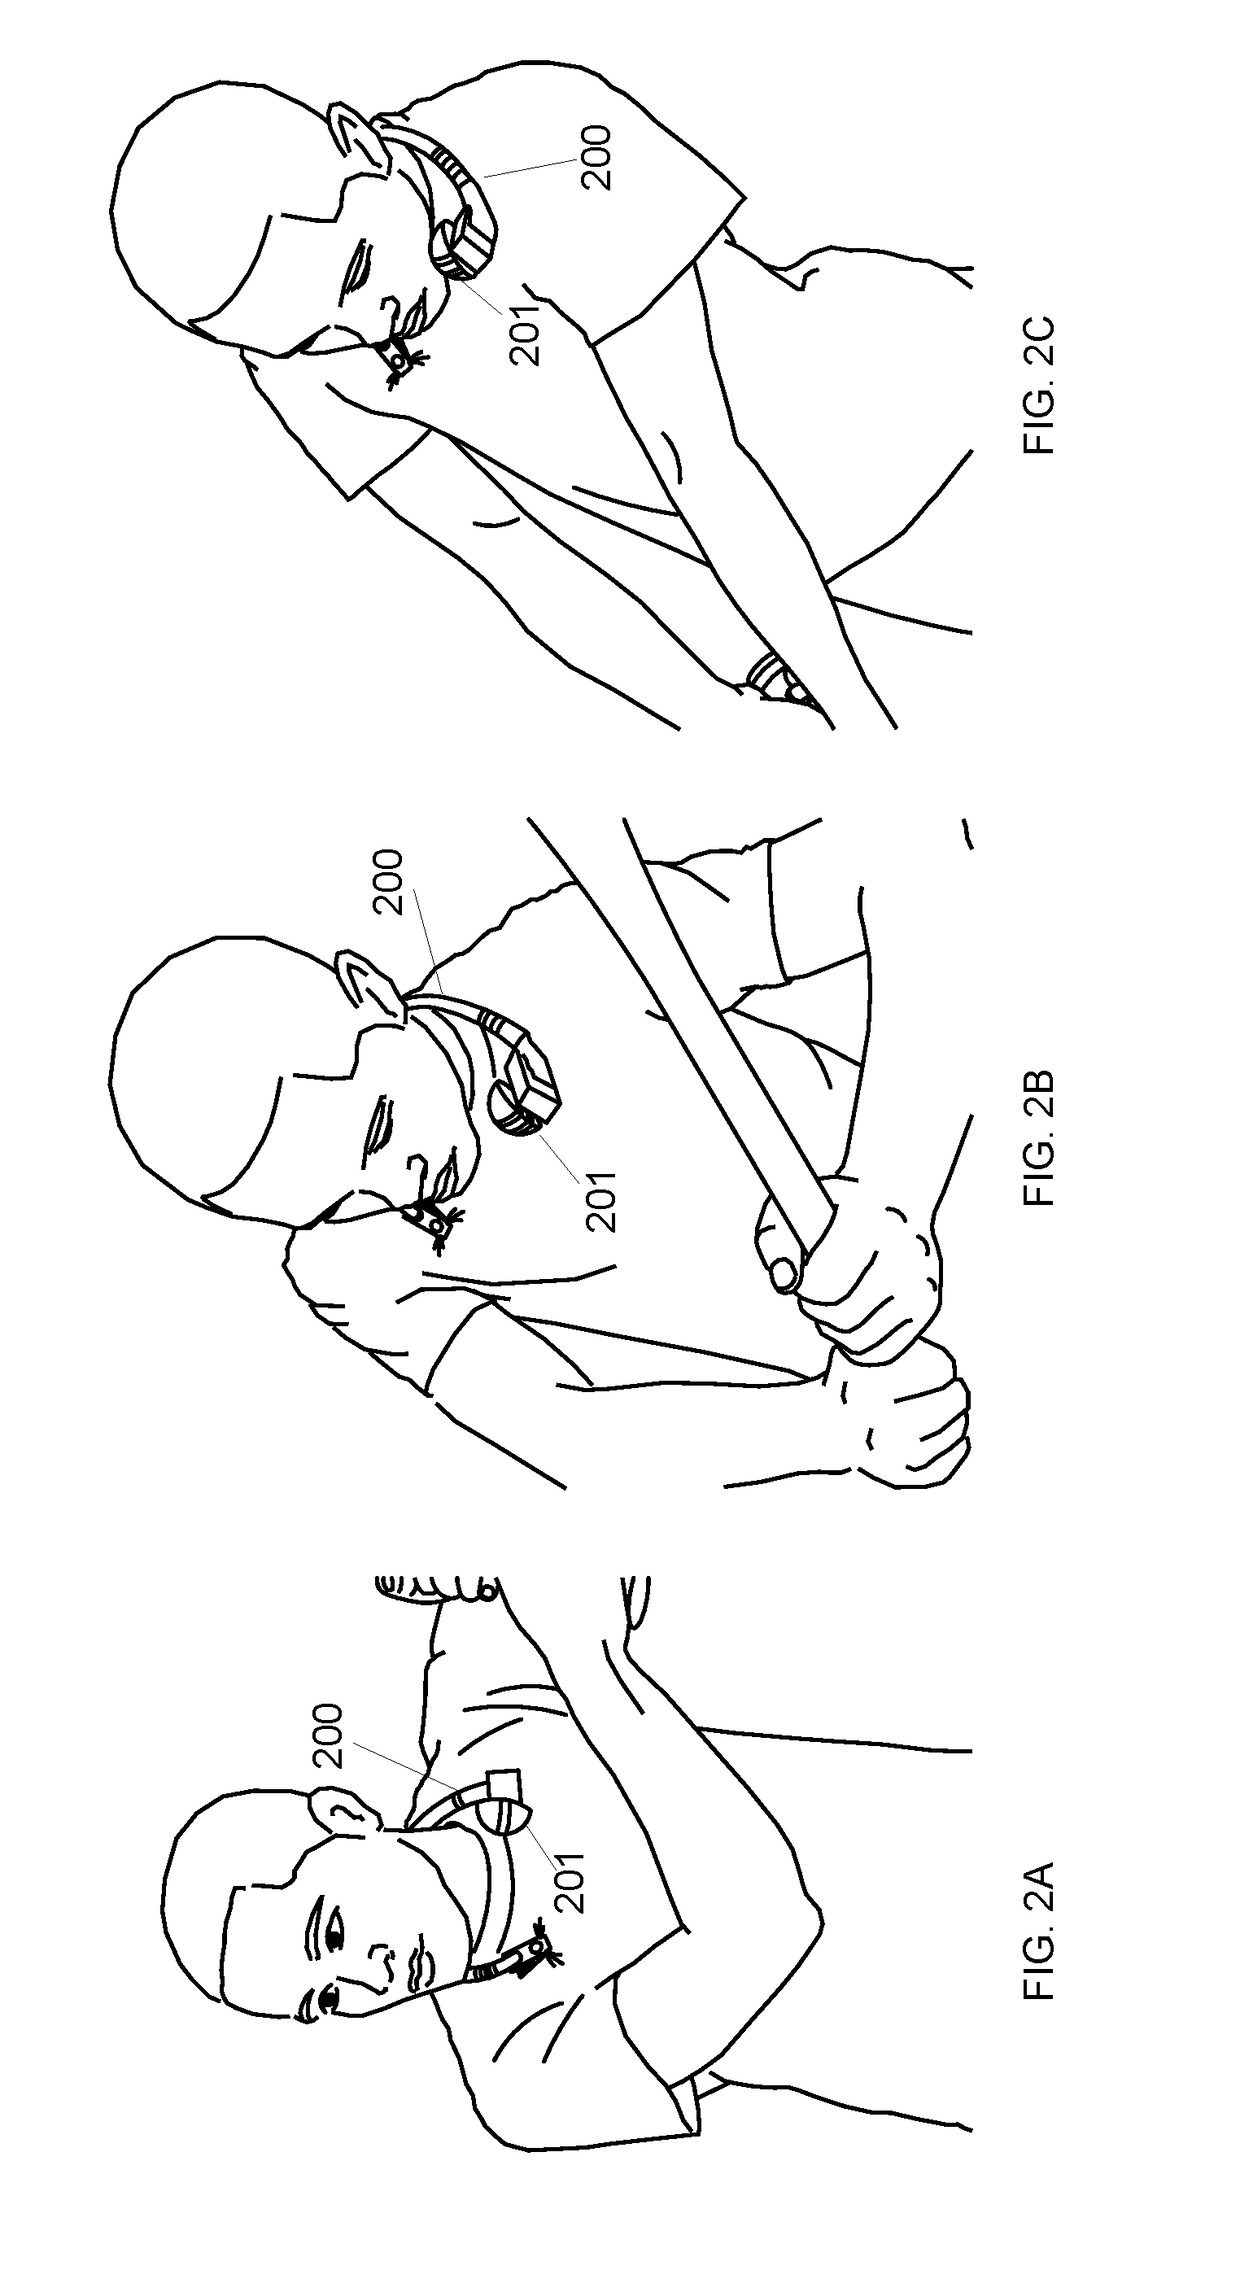 Devices to improve swing technique, and methods of use thereof